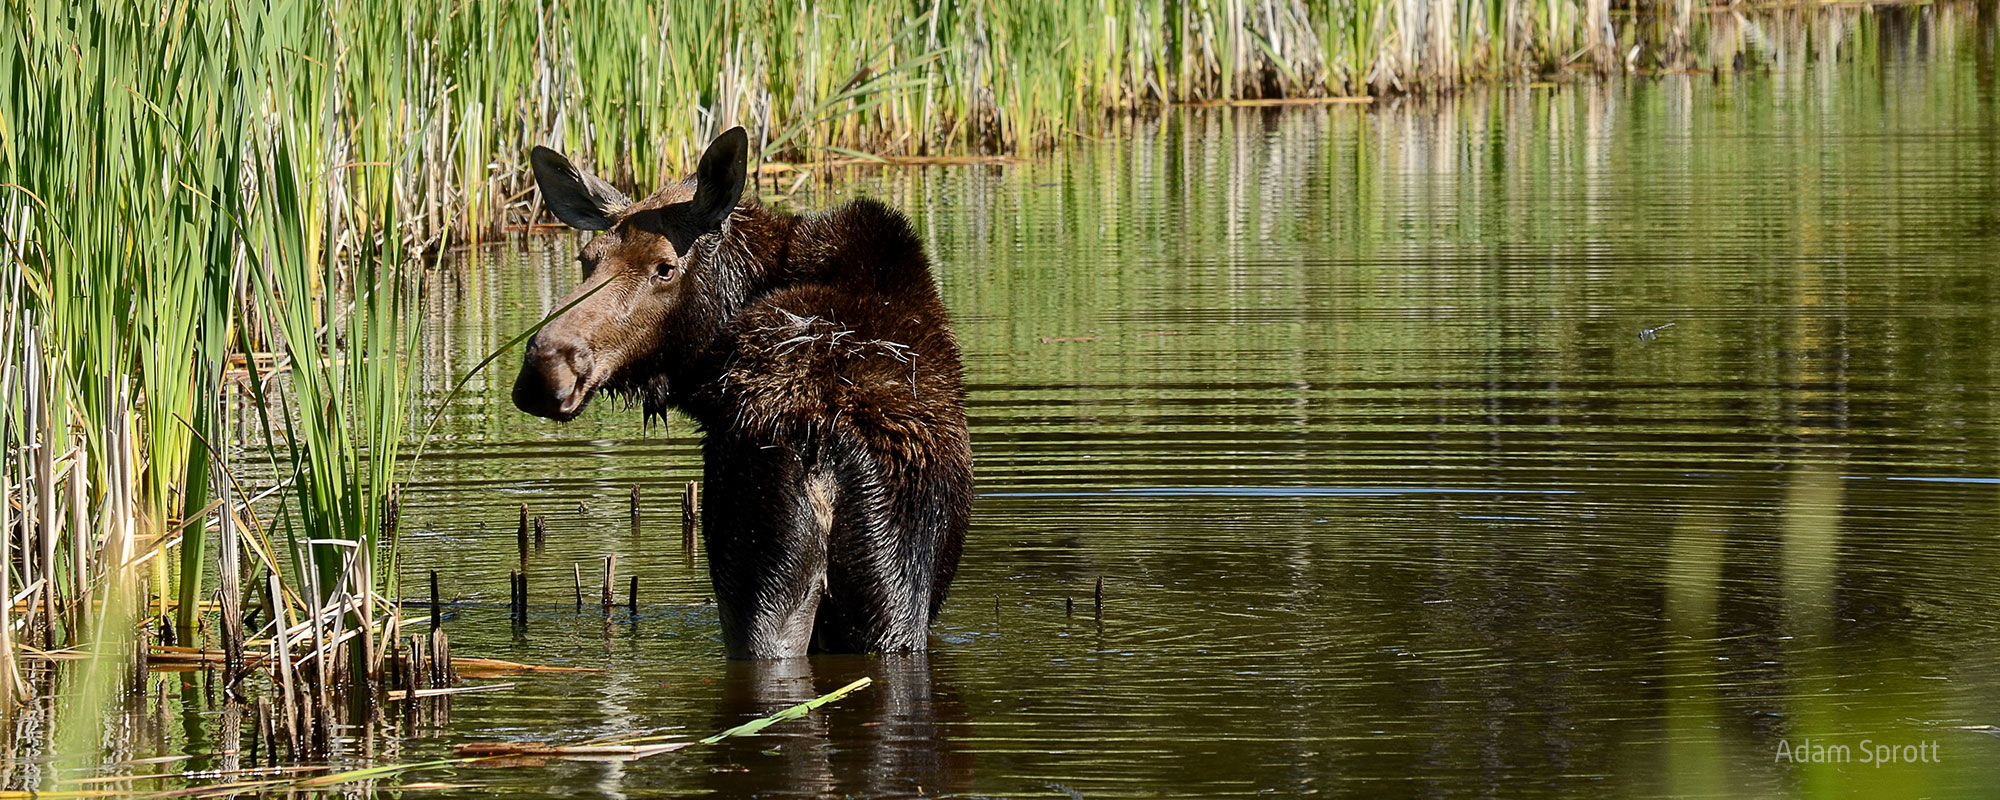 Moose Response to Disturbance in West-central Alberta